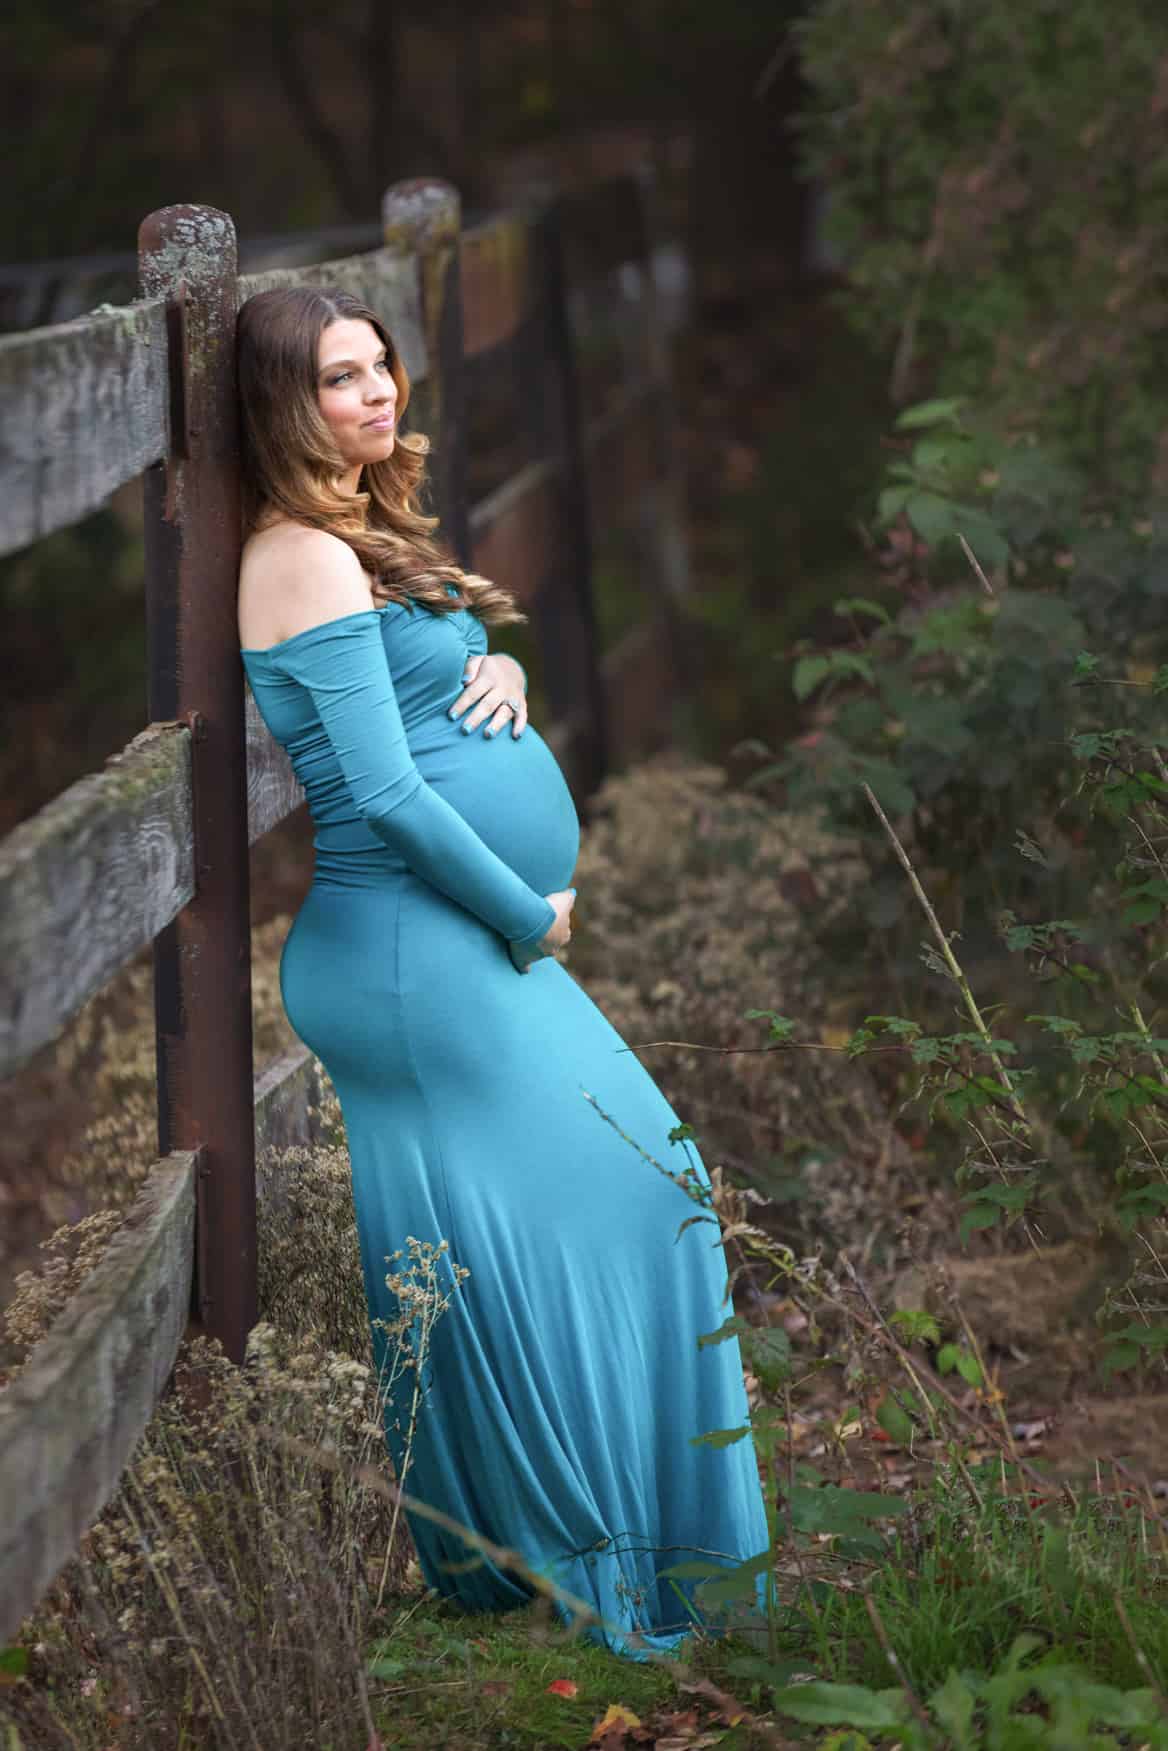 Windham NH Maternity in blue dress at horse farm leaning up against fence